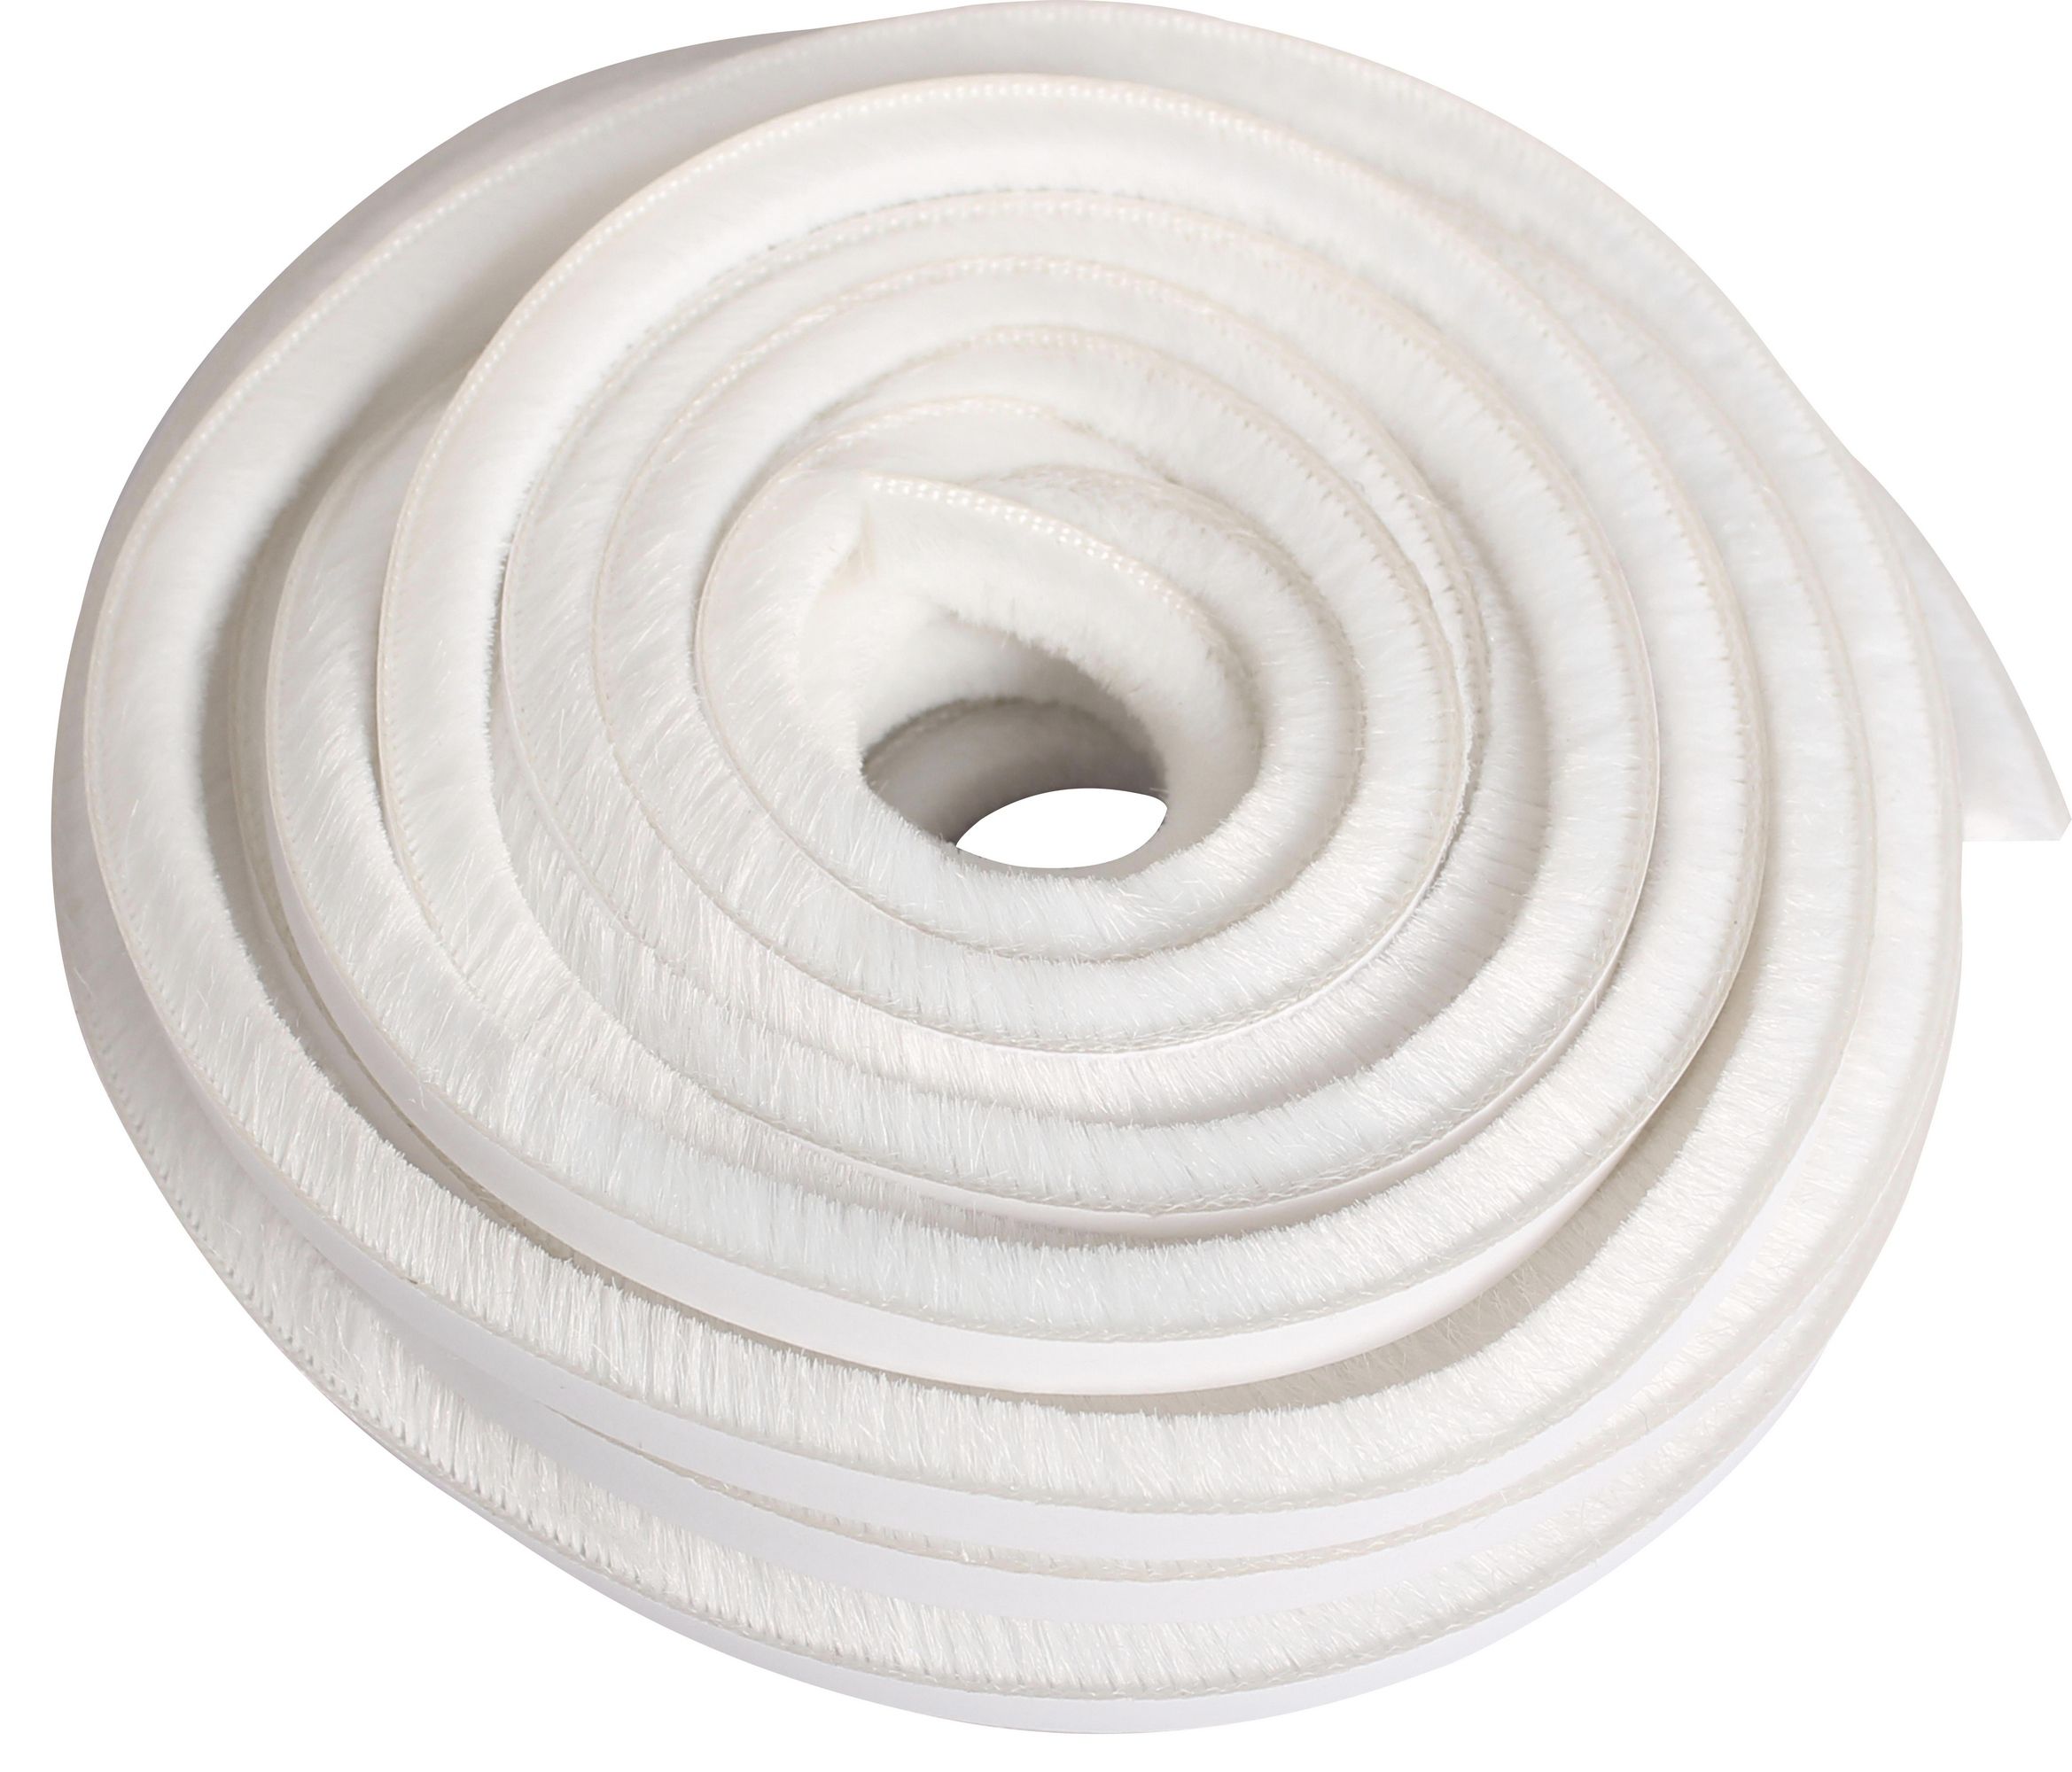 Diall White Plastic Self-adhesive Draught excluder, (L)20m